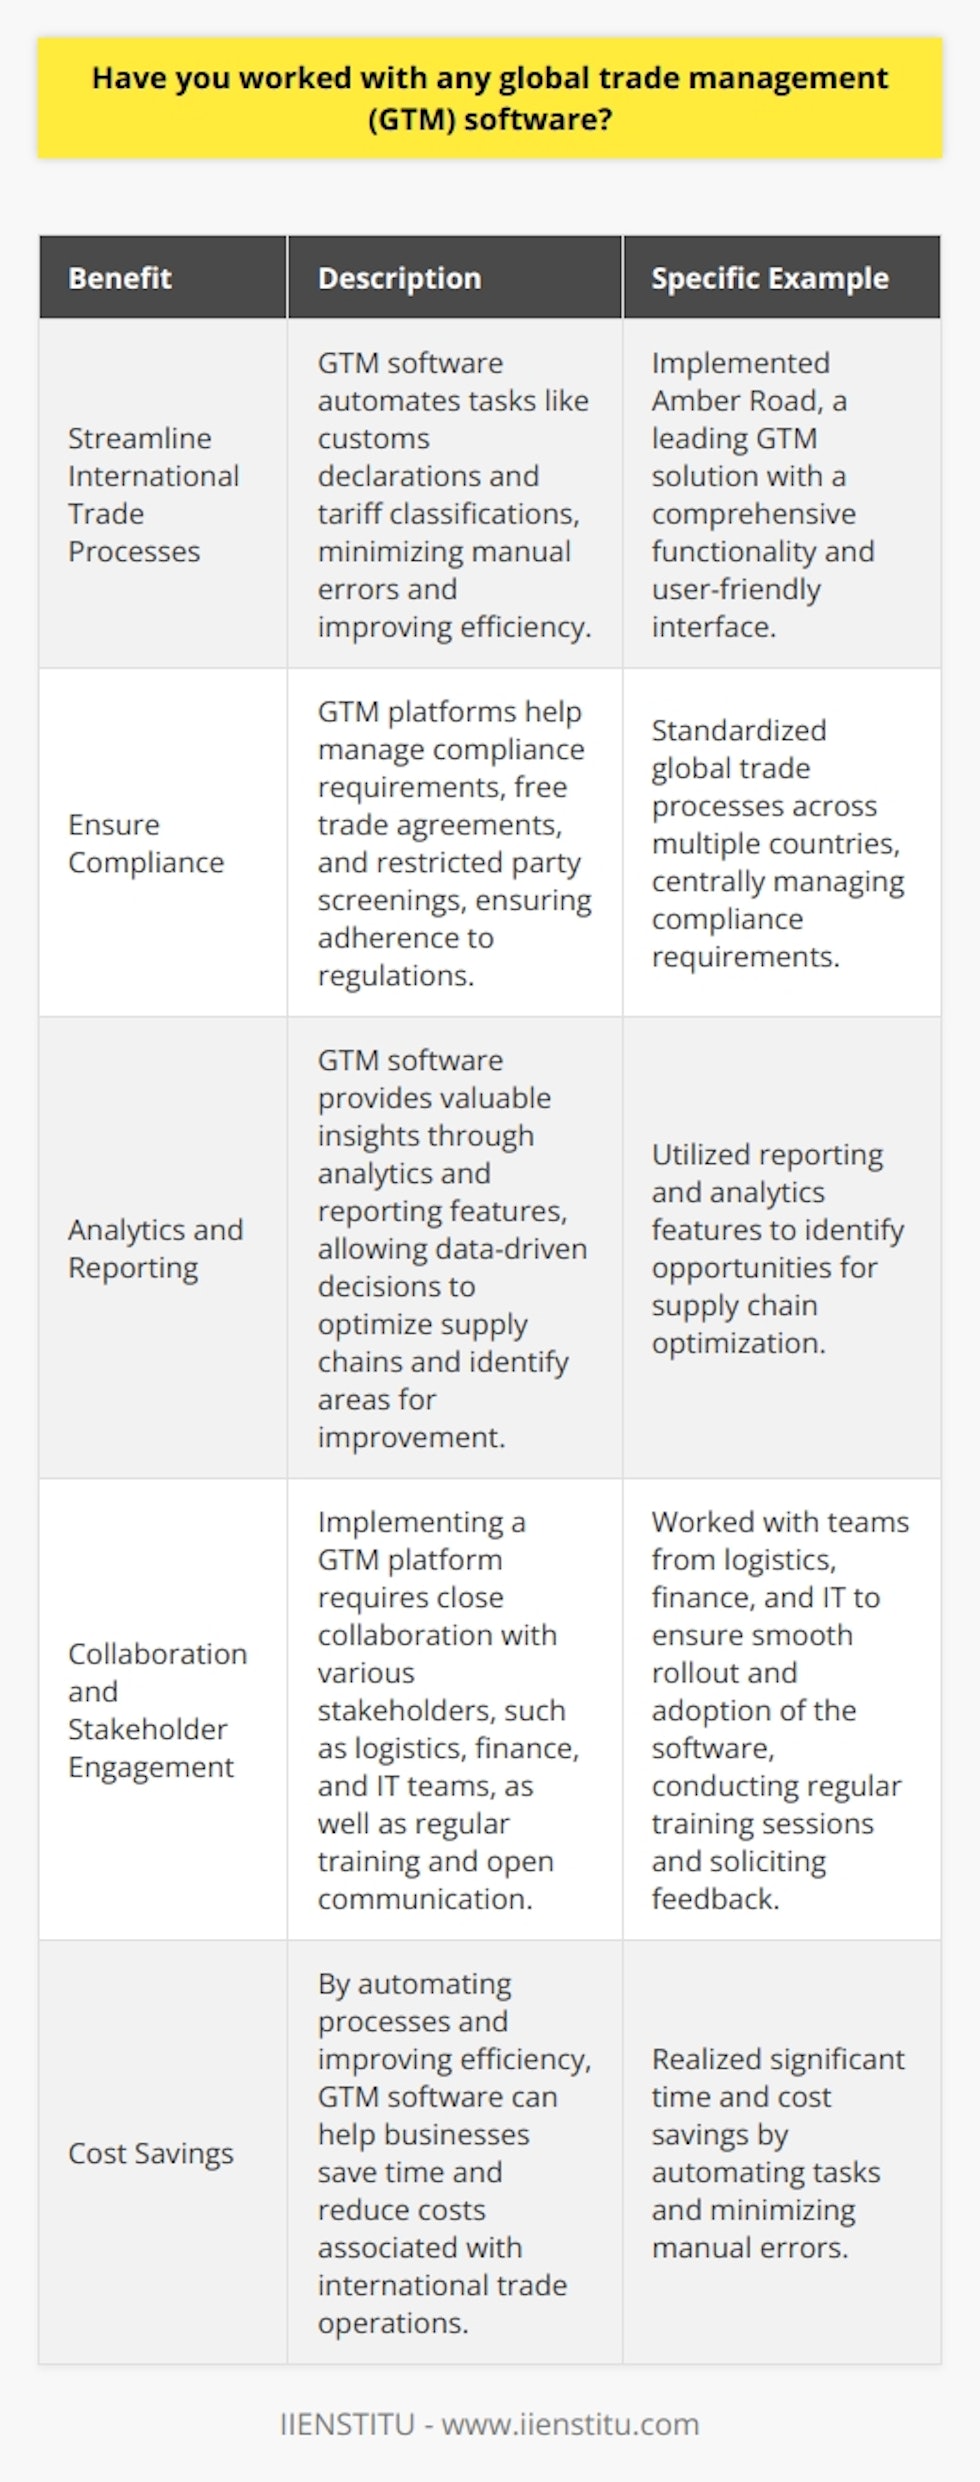 Yes, I have experience working with global trade management software in my previous roles. GTM systems are essential for streamlining international trade processes and ensuring compliance with regulations. Benefits of GTM Software Ive seen firsthand how GTM software can help businesses save time and reduce costs. By automating tasks like customs declarations and tariff classifications, companies can minimize manual errors and improve efficiency. GTM platforms also provide valuable insights through analytics and reporting features. This allows organizations to make data-driven decisions to optimize their supply chains and identify areas for improvement. Specific GTM Systems In my last position, we implemented a leading GTM solution called Amber Road. I was impressed by its comprehensive functionality and user-friendly interface. The system helped us standardize our global trade processes across multiple countries. We were able to centrally manage compliance requirements, free trade agreements, and restricted party screenings. Collaborating with Stakeholders Implementing a GTM platform requires close collaboration with various stakeholders. I worked with teams from logistics, finance, and IT to ensure a smooth rollout and adoption of the software. Regular training sessions and open communication were key to getting everyone on board. We solicited feedback to continuously improve our GTM processes and address any challenges. Overall, my experience with GTM software has been extremely positive. I believe its a must-have tool for any company engaged in international trade.